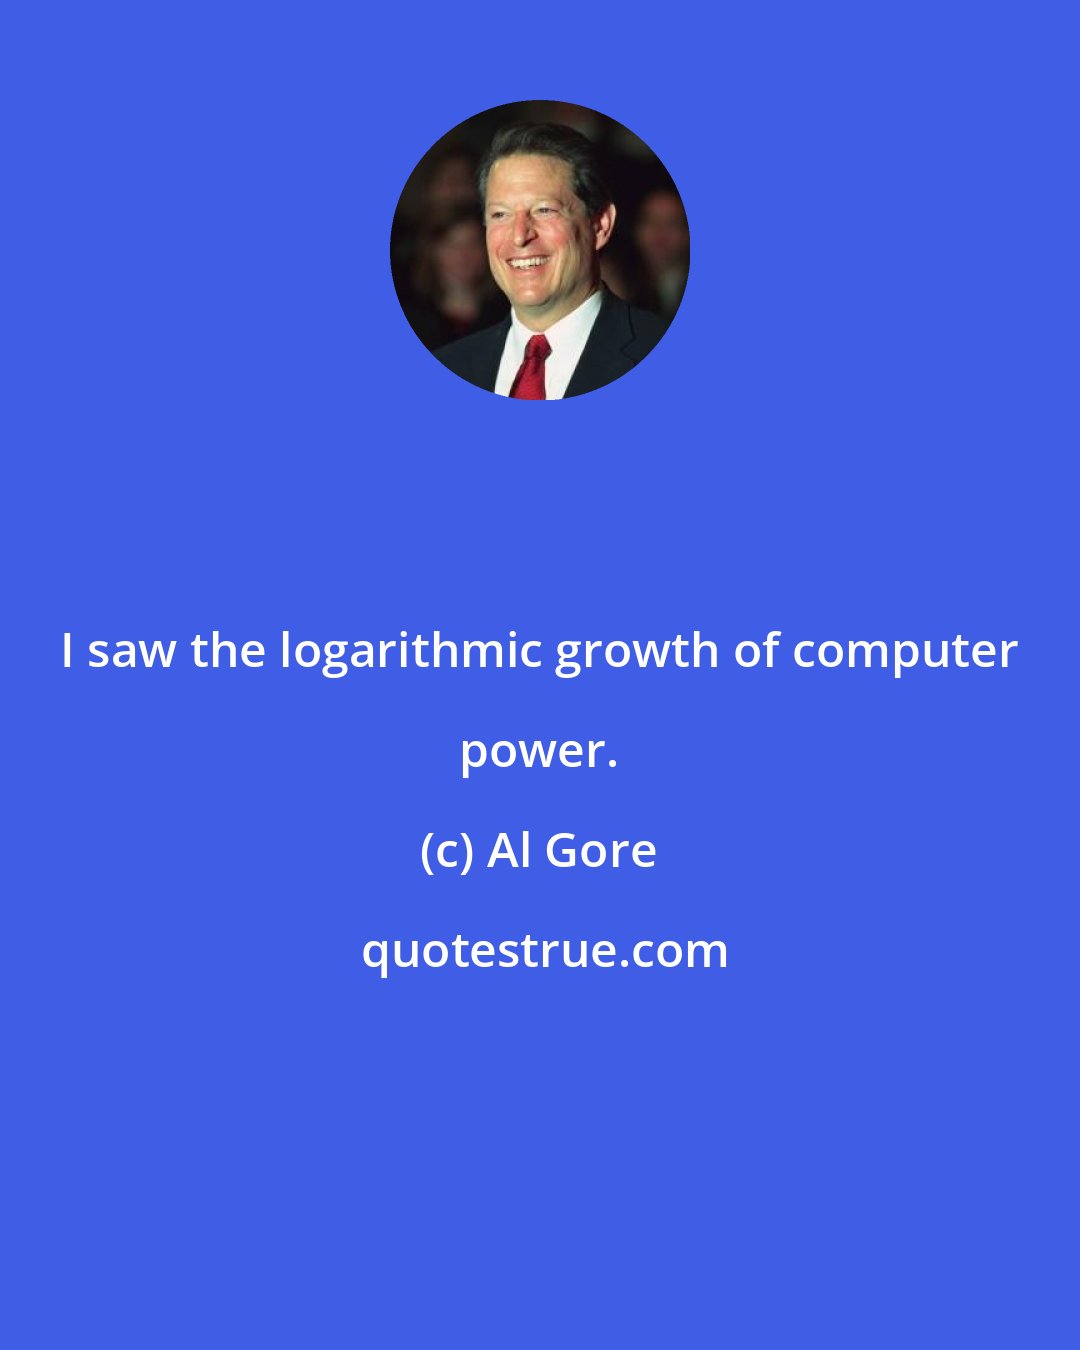 Al Gore: I saw the logarithmic growth of computer power.